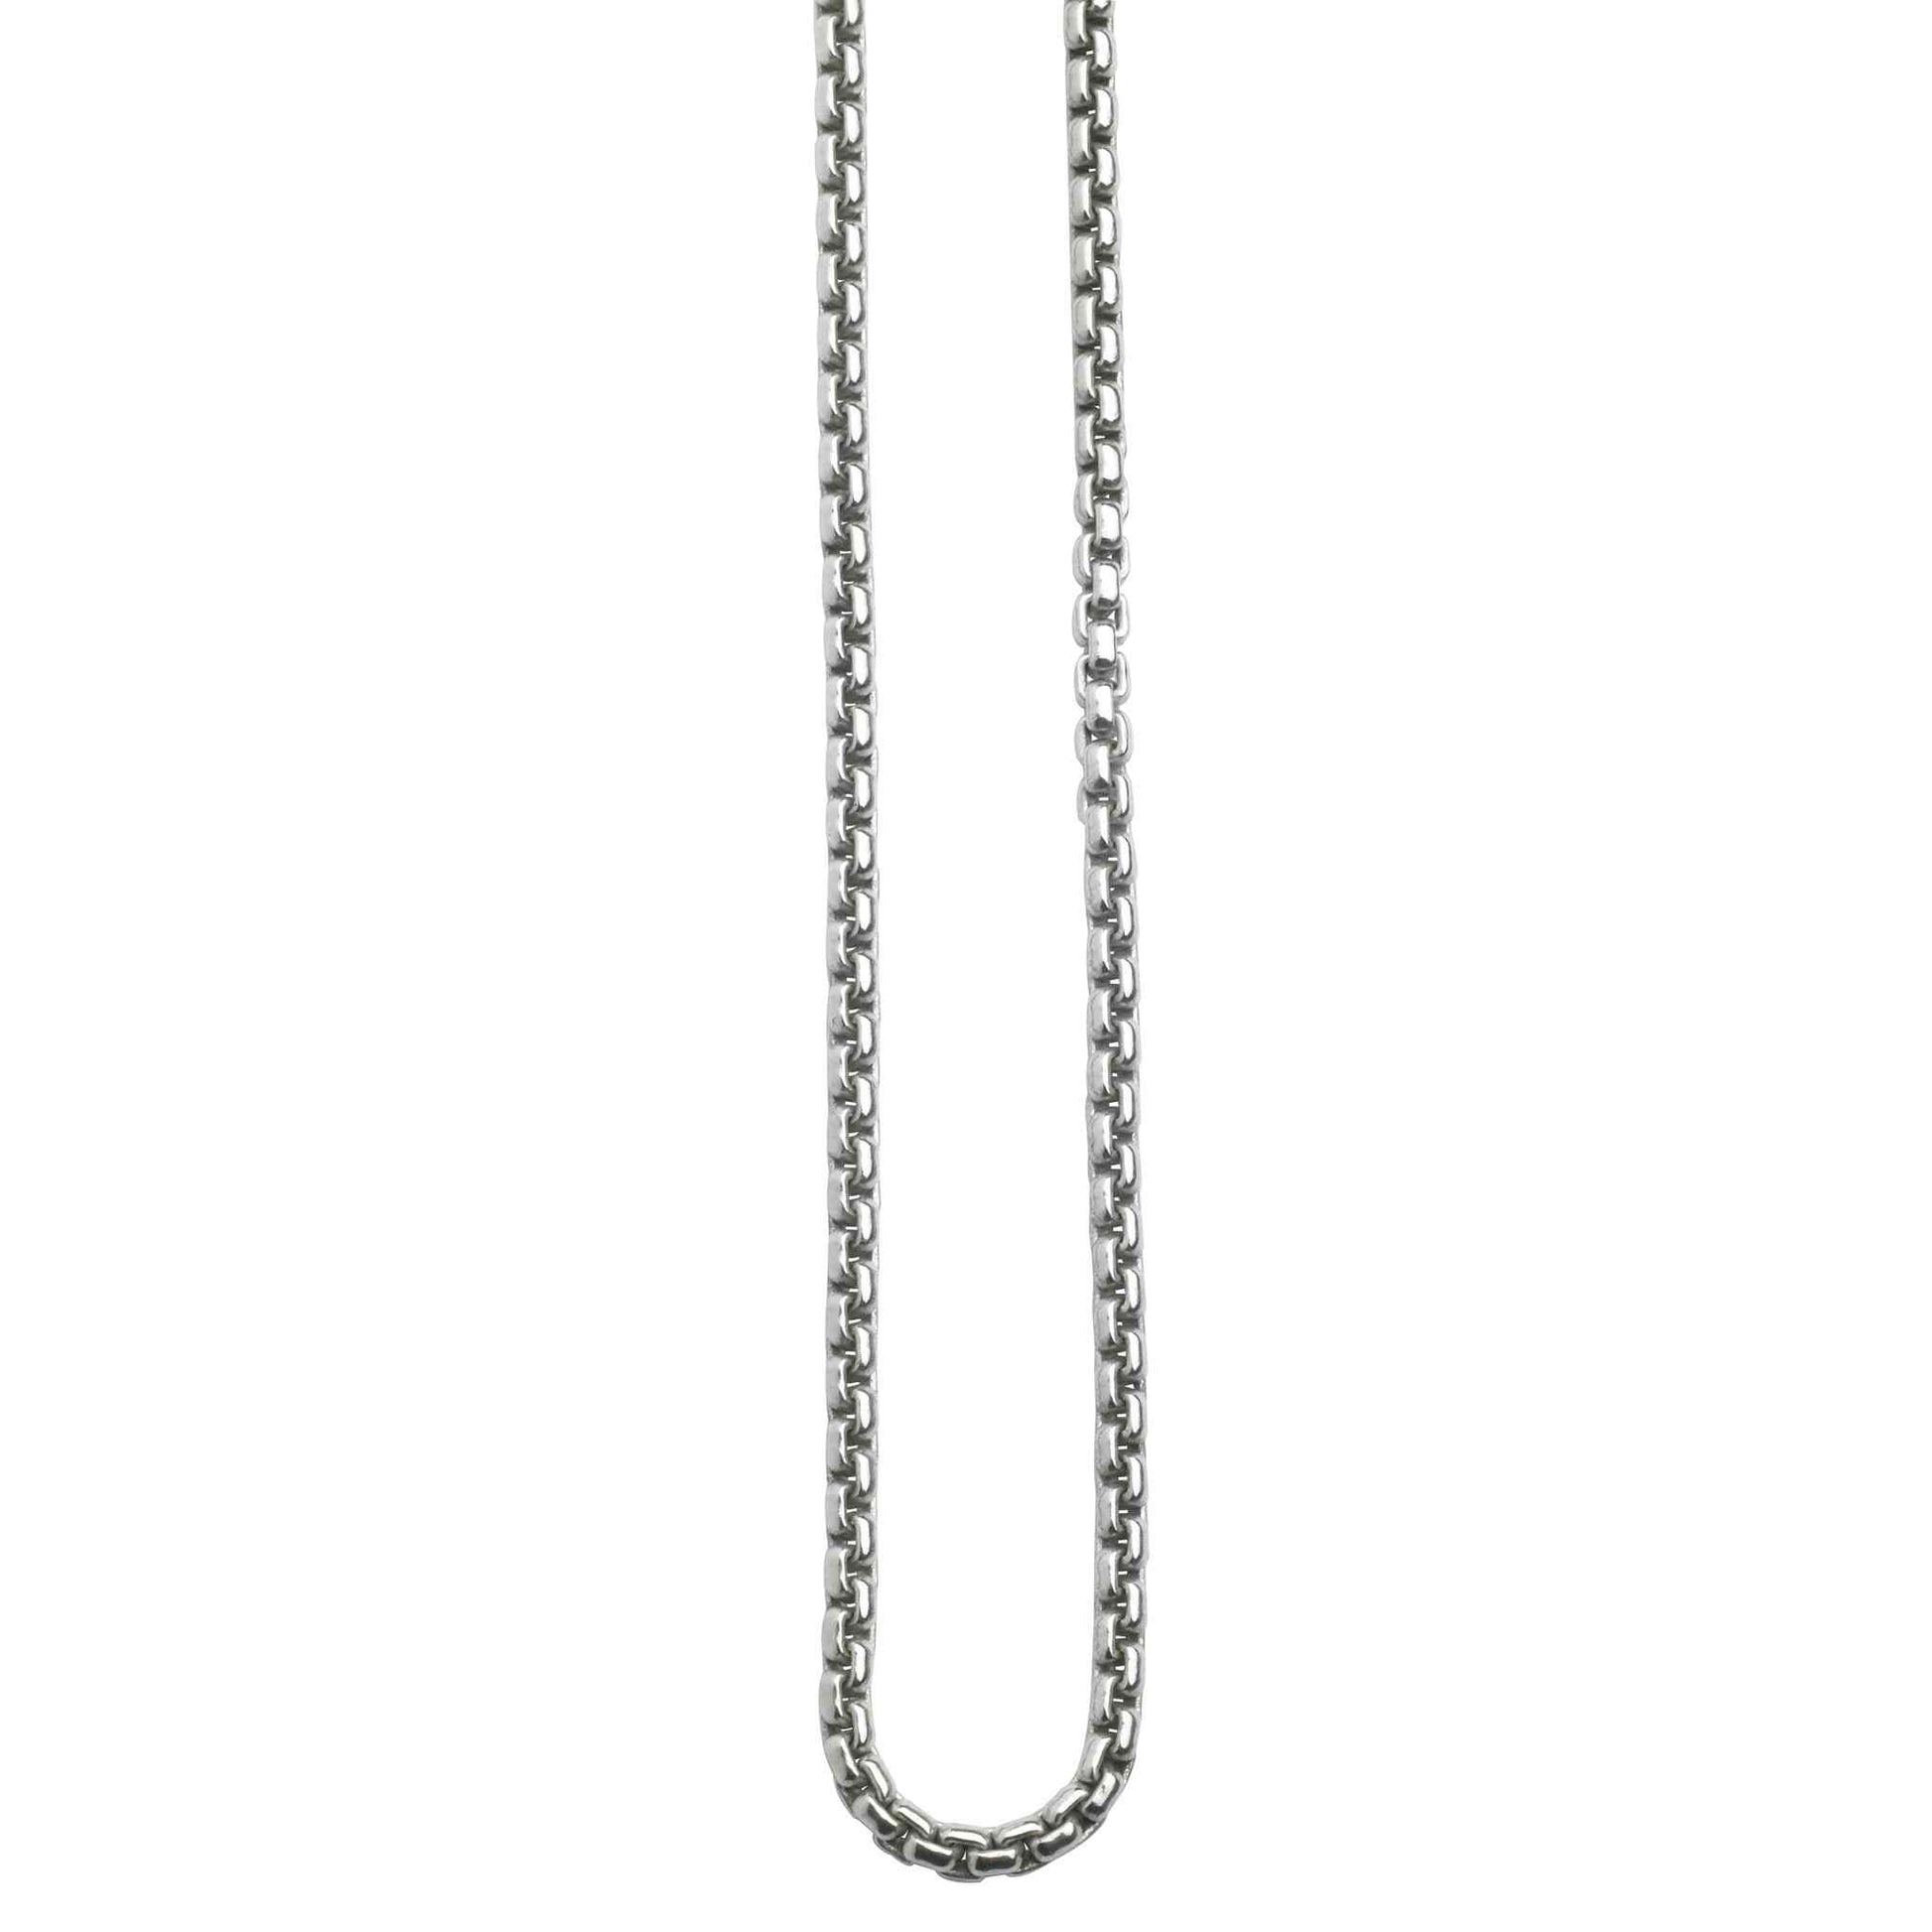 A 2.0 mm sterling silver 16" rounded box chain displayed on a neutral white background.